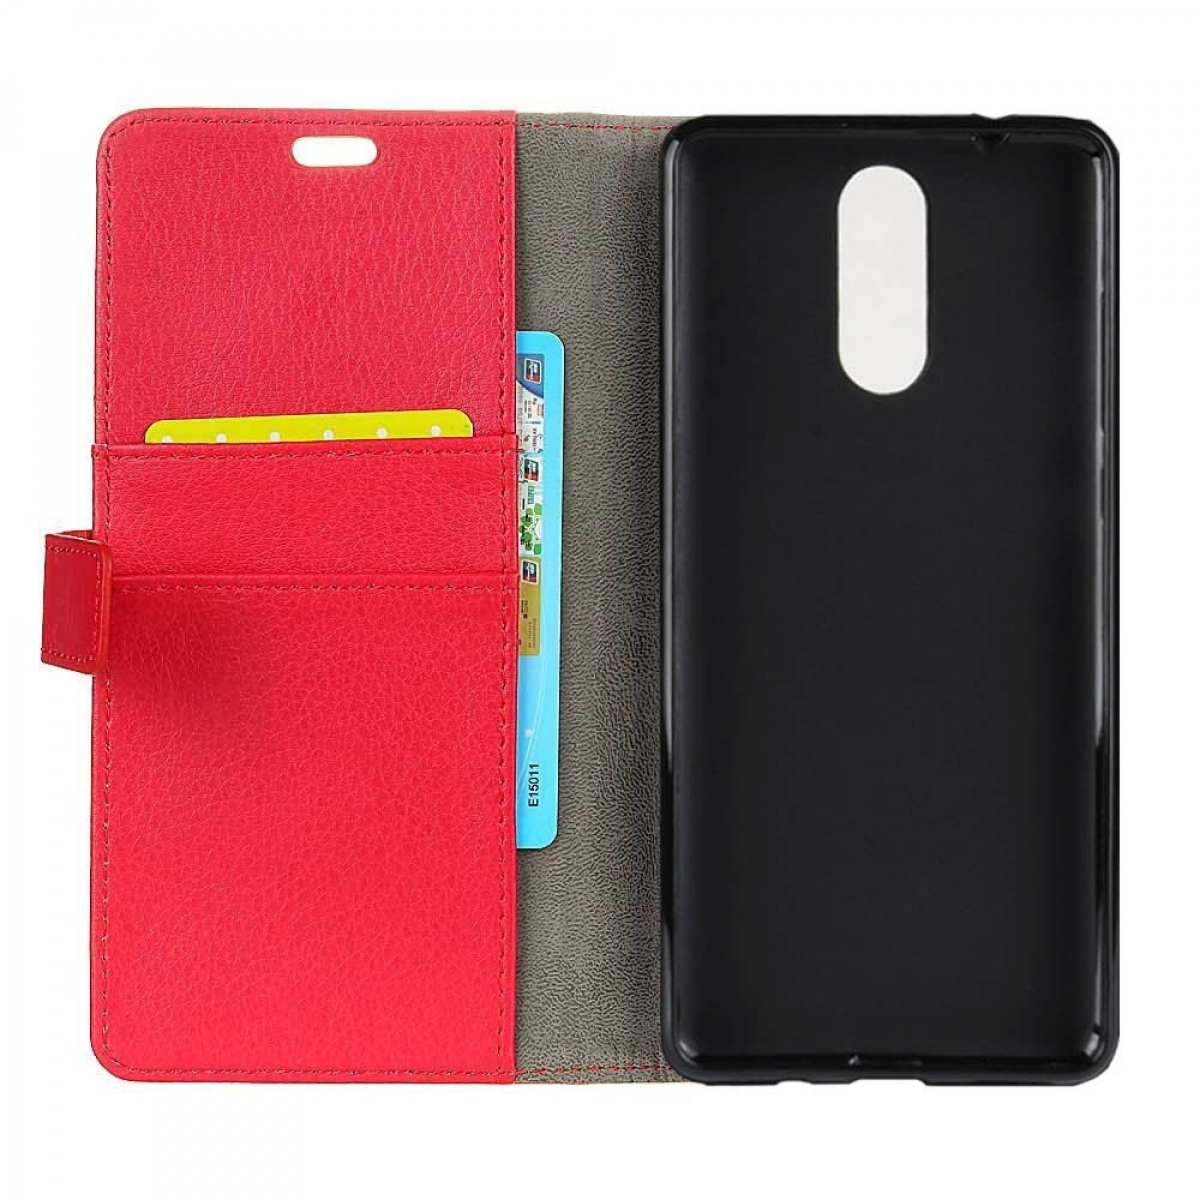 3.1 - CASEONLINE Nokia, Rot Klappbare Bookcover, Plus, Rot,